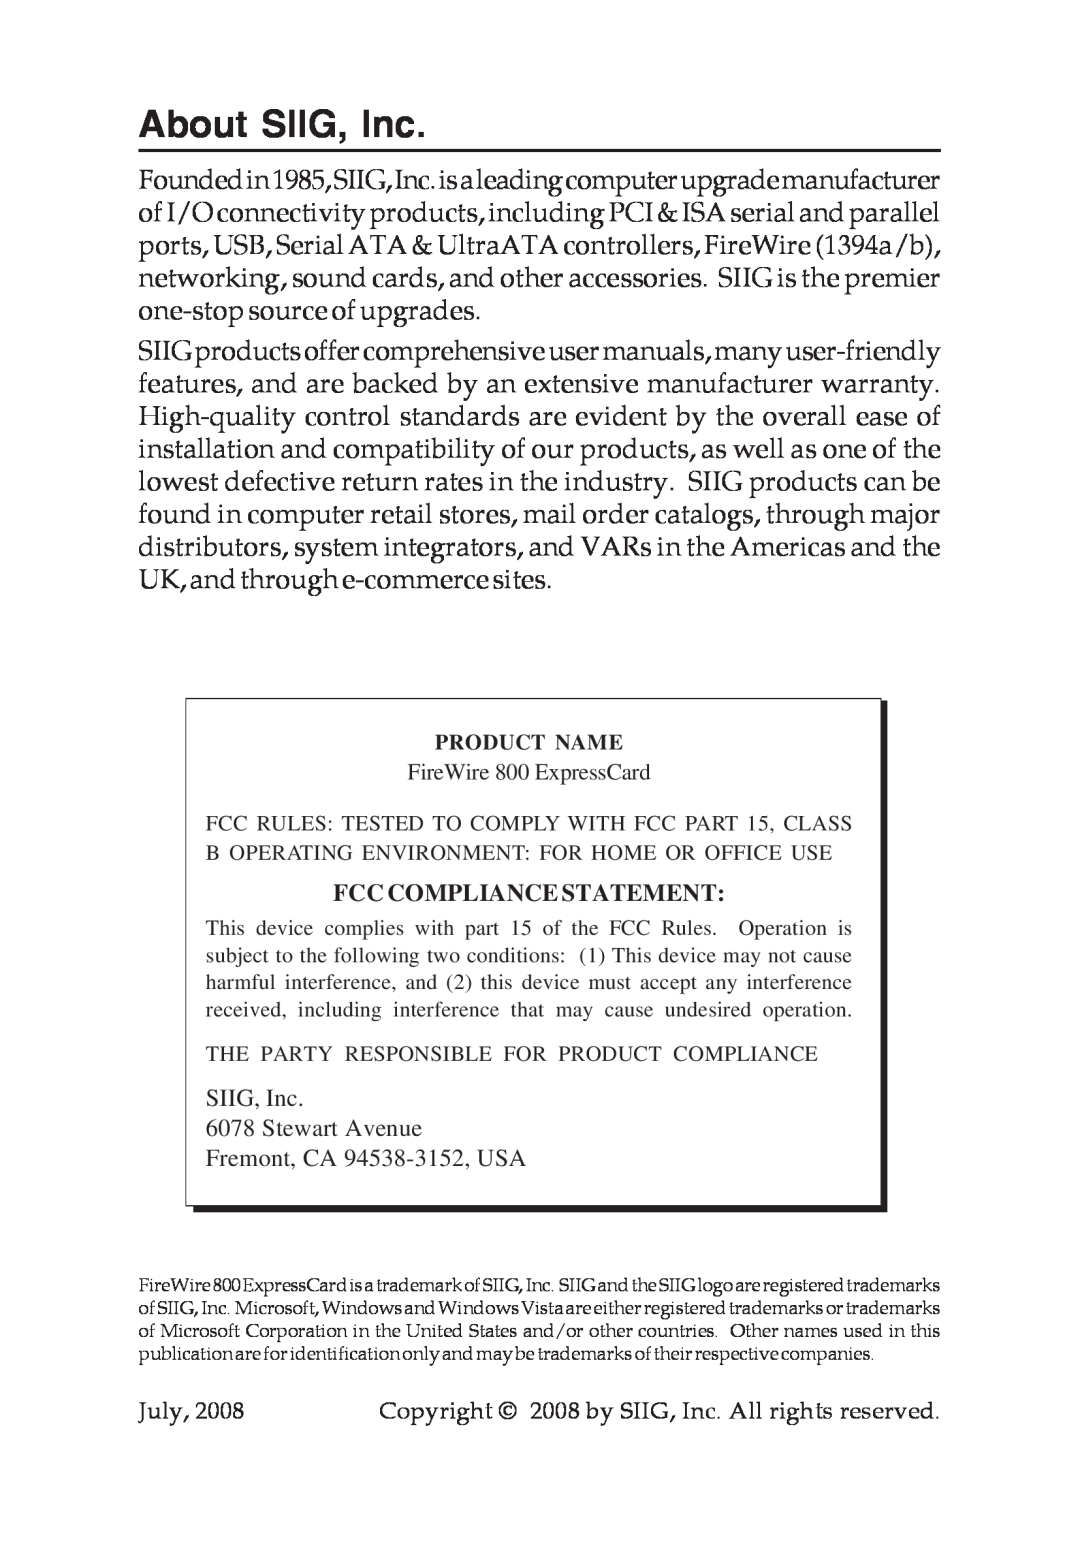 SIIG 700 manual About SIIG, Inc, Fcc Compliance Statement 